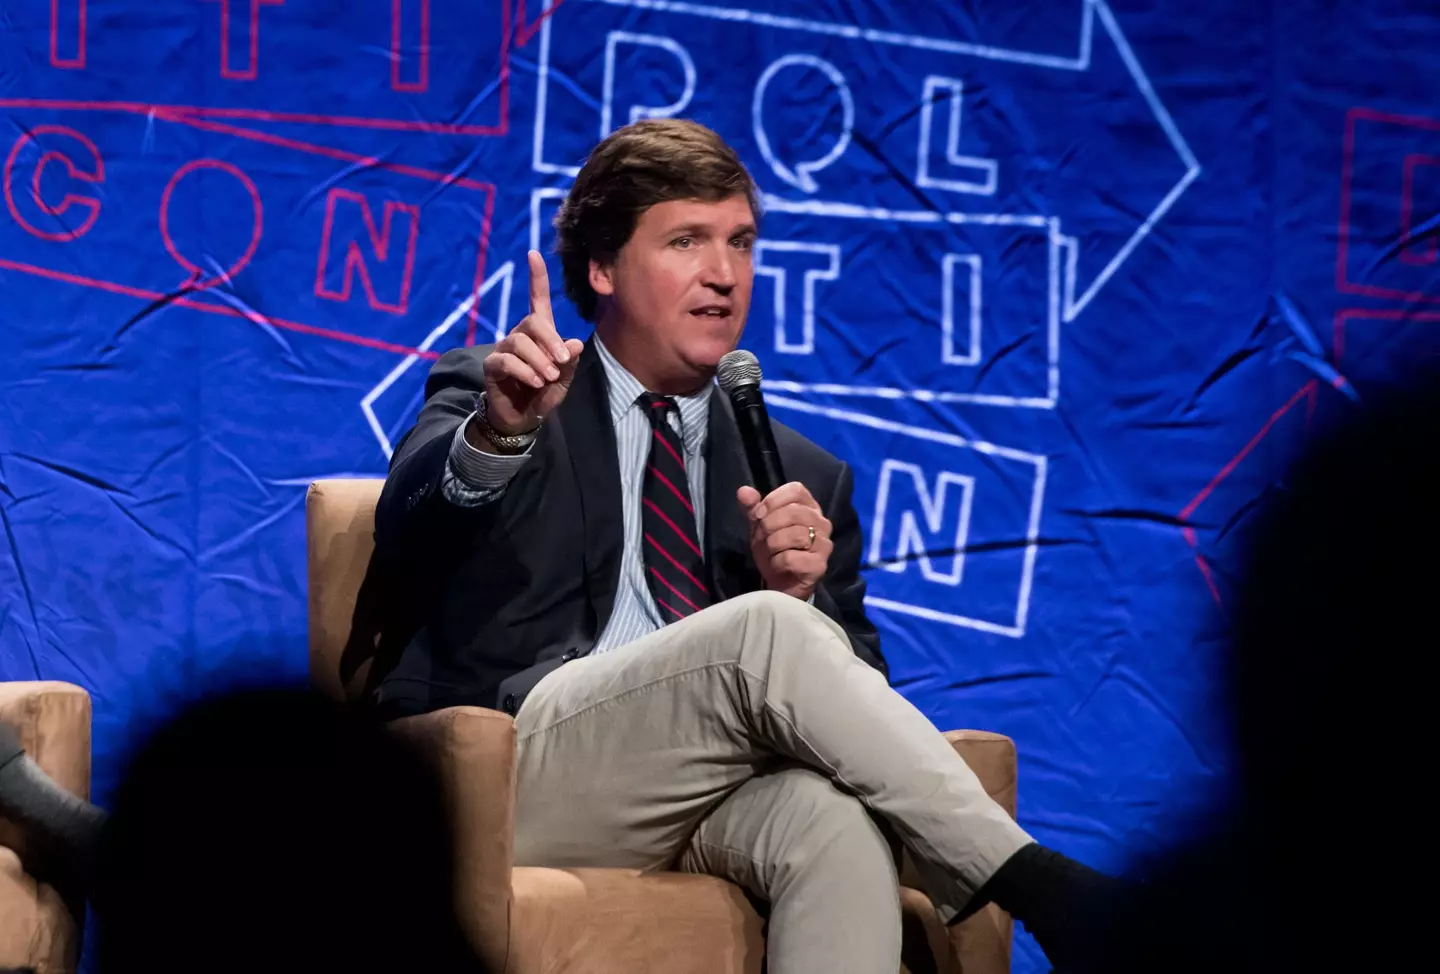 The discovery of a 'highly offensive' text message sent by Tucker Carlson lead to him being dismissed from his position at Fox News.